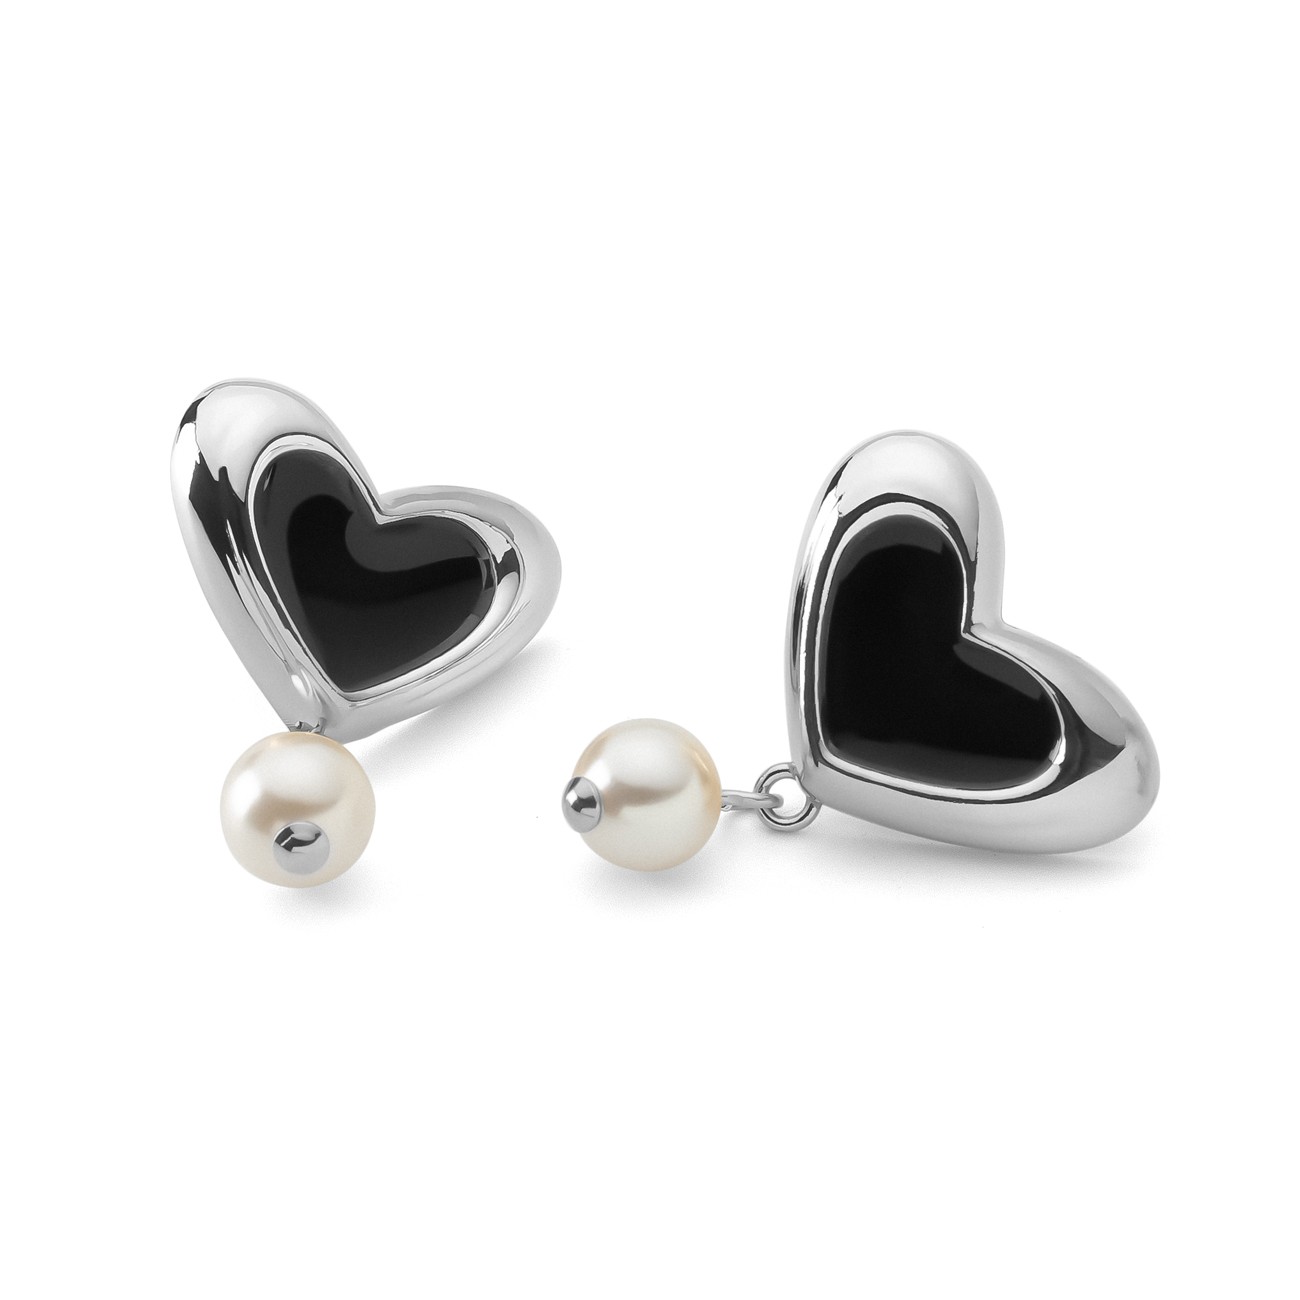 Heart earrings with black resin and pearl, sterling silver 925